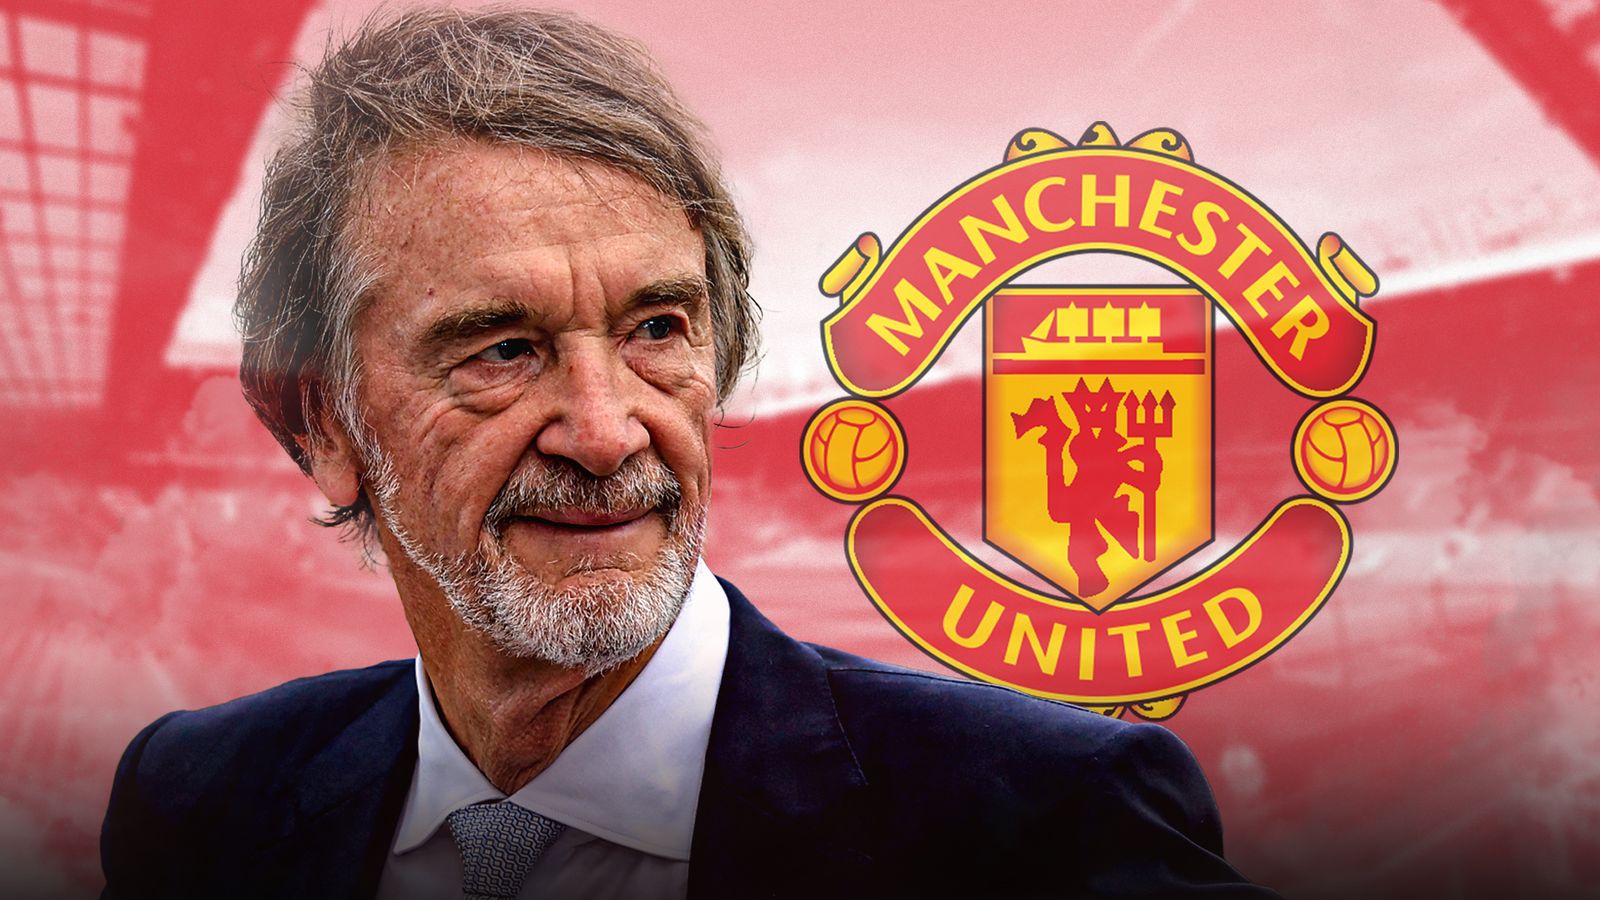 Manchester United takeover: Sir Jim Ratcliffe completes deal to purchase 25 per cent of club | Football News